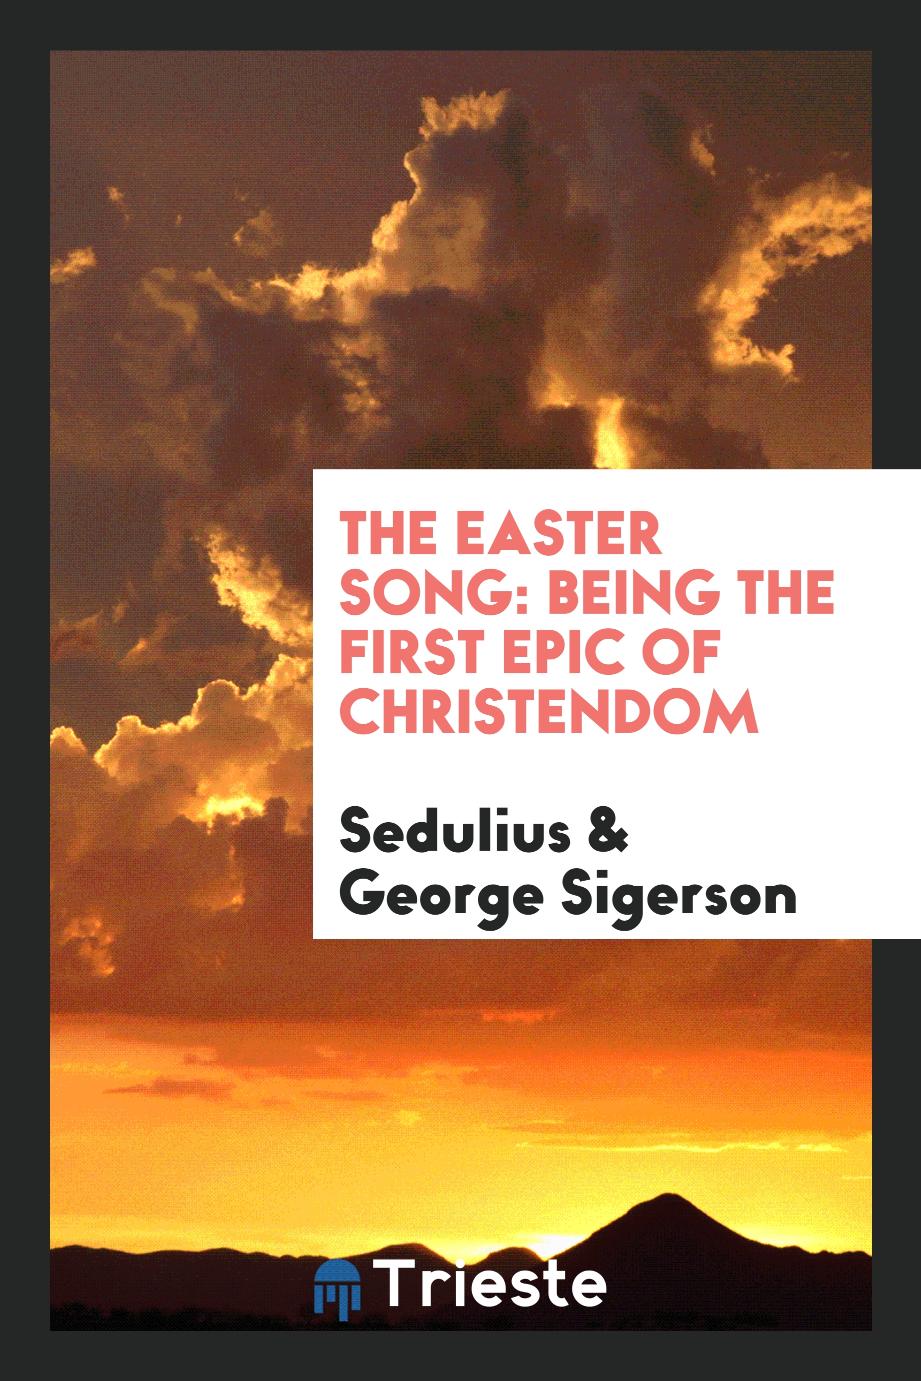 The Easter song: being the first epic of Christendom